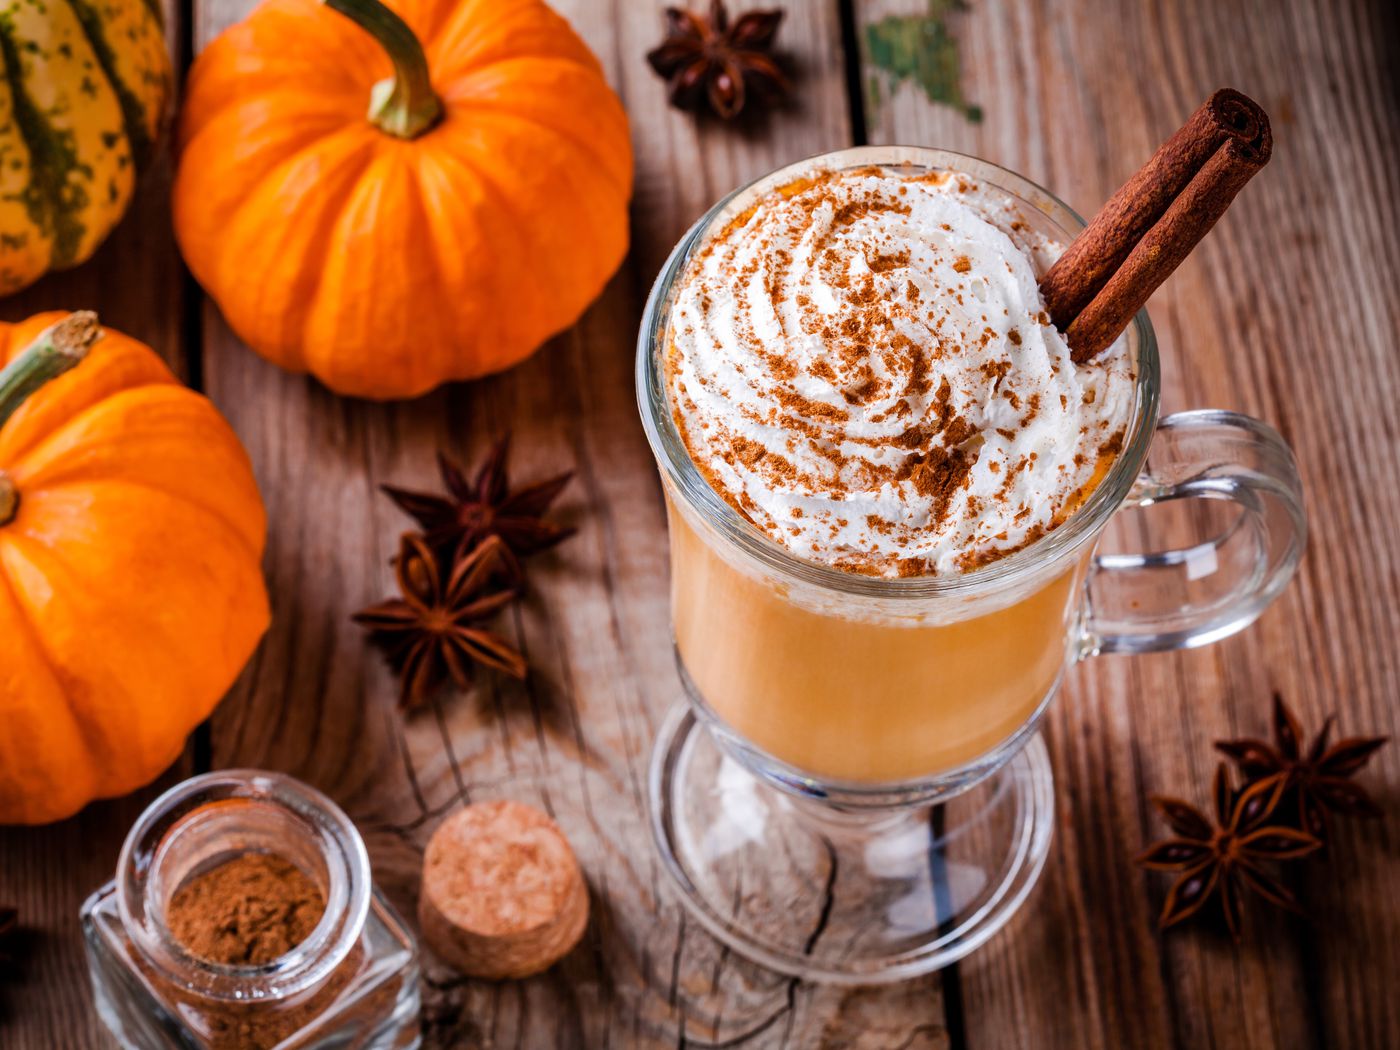 How To Make A Pumpkin Spice Latte At Home? Sun Times